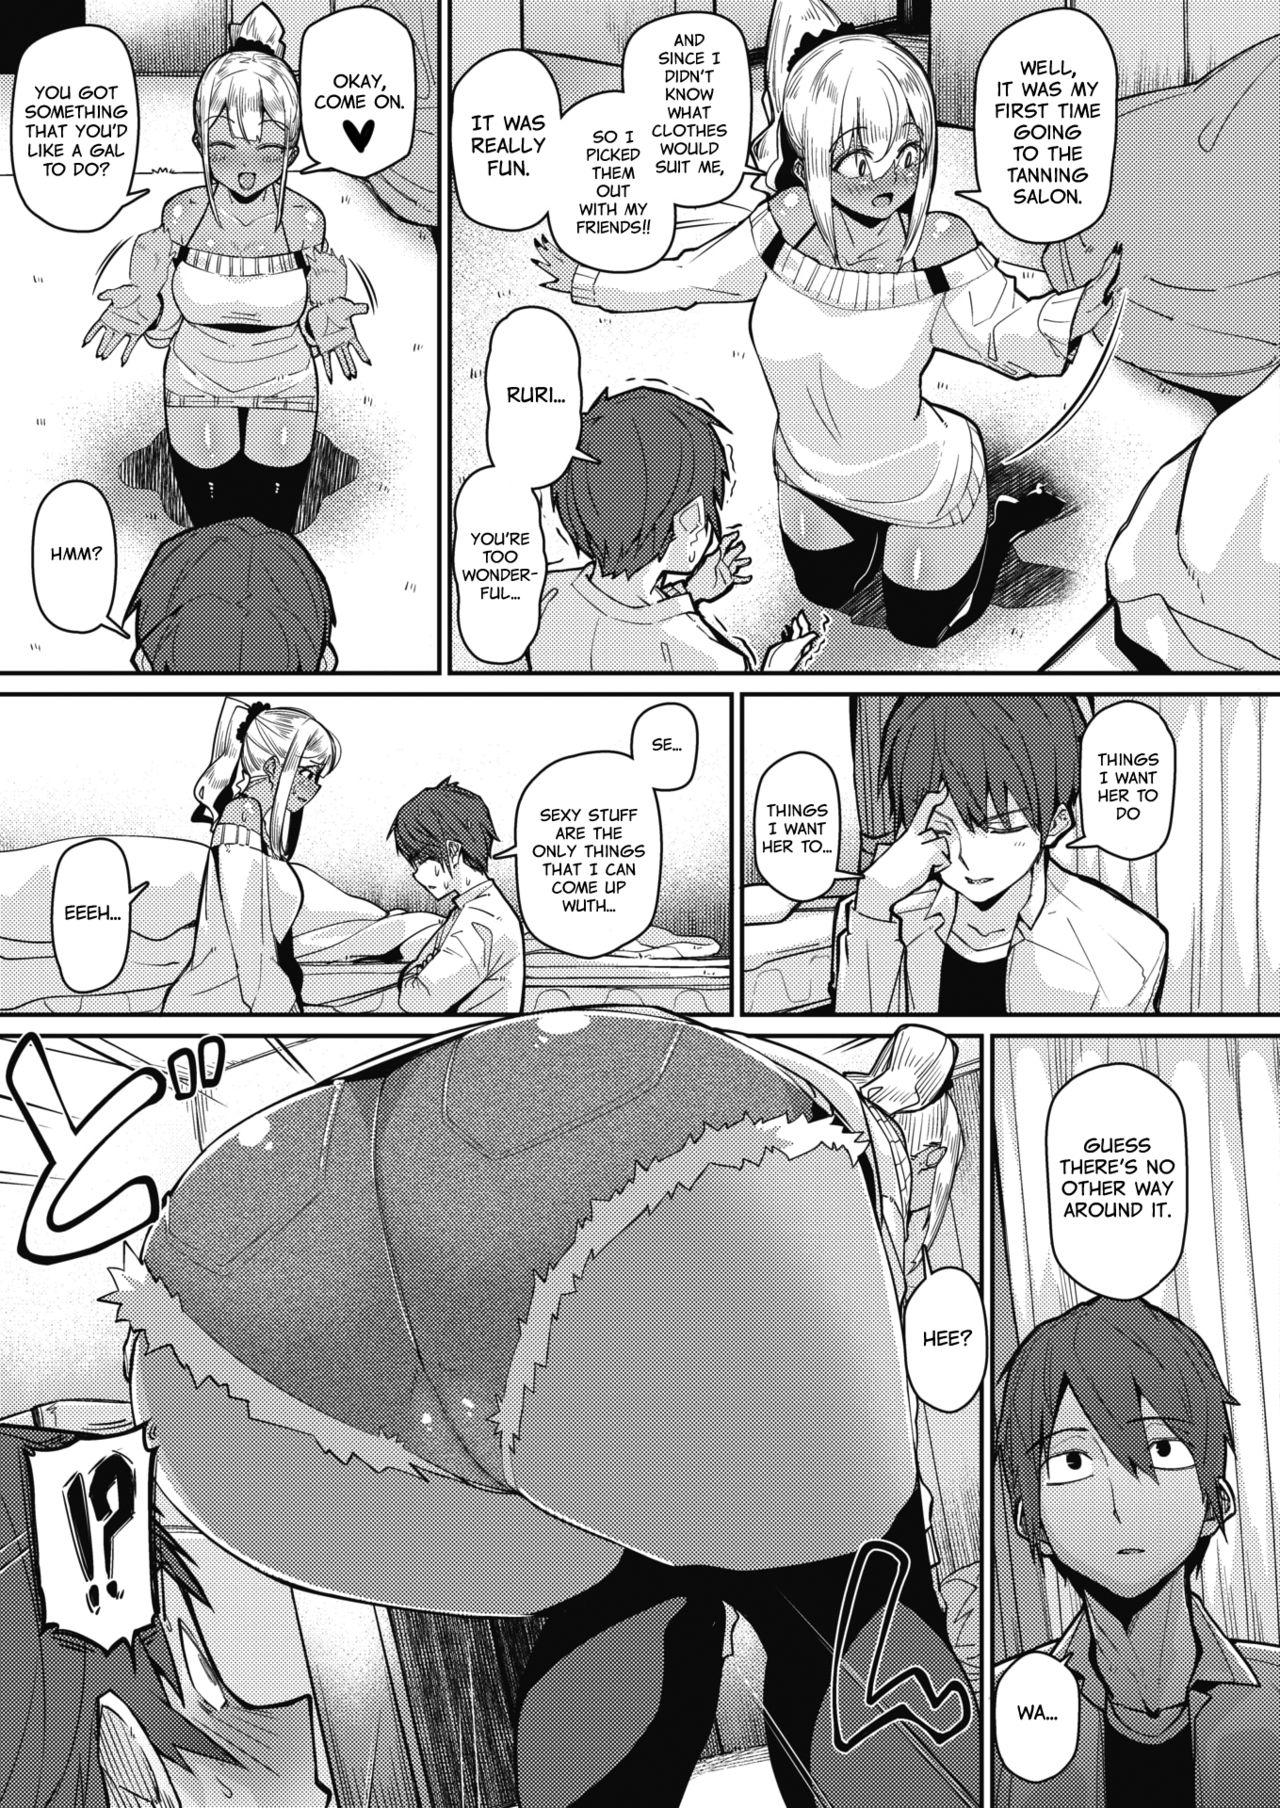 Foursome Gekkan "Za Bicchi" wo Mita Onna no Hannou ni Tsuite | About the Reaction of the Girl Who Saw "The Bitch Monthly" Fun - Page 5